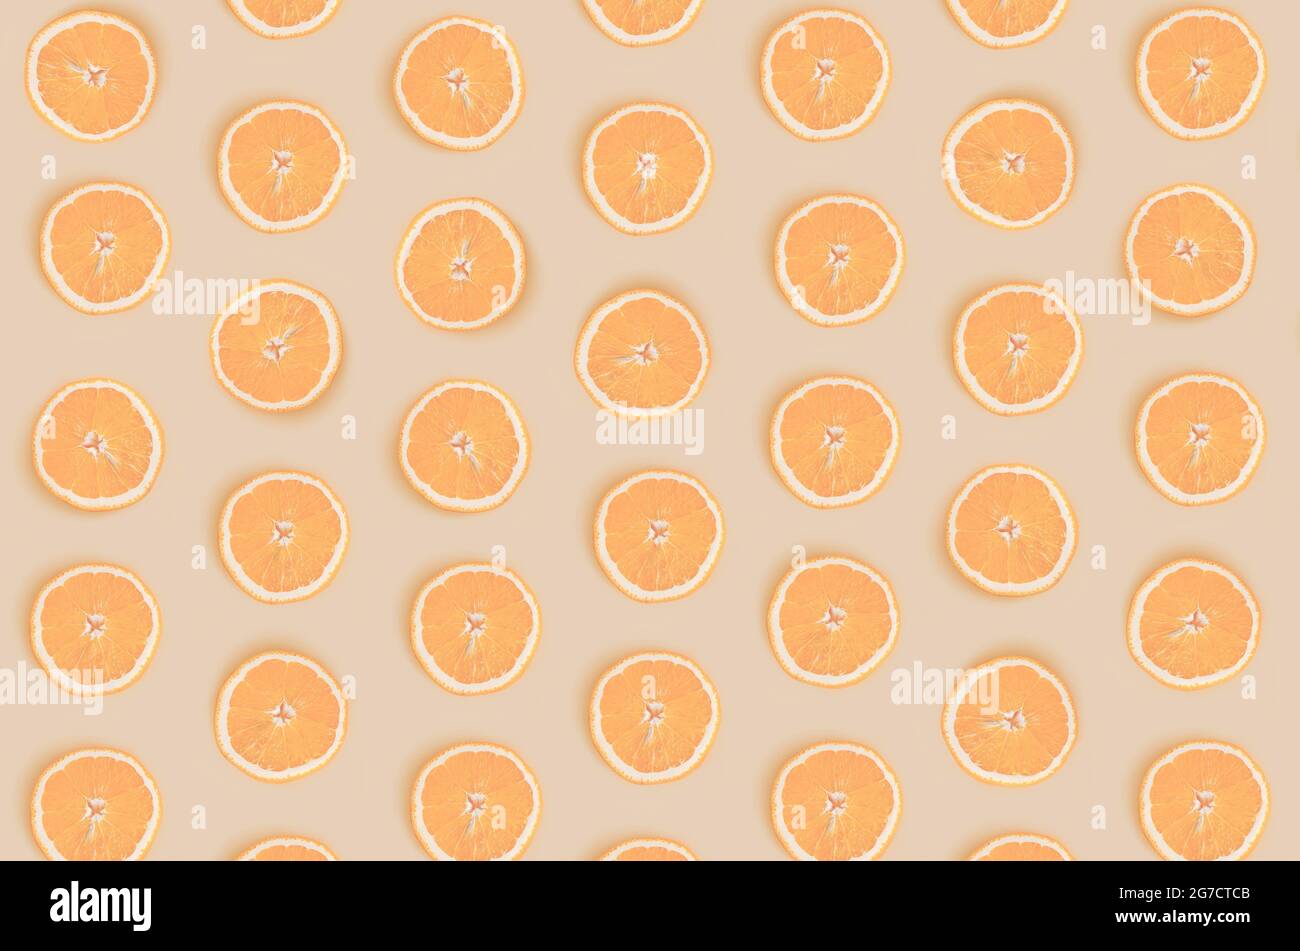 Fruit pattern from round orange slices isolated on light orange background. View from above. Stock Photo